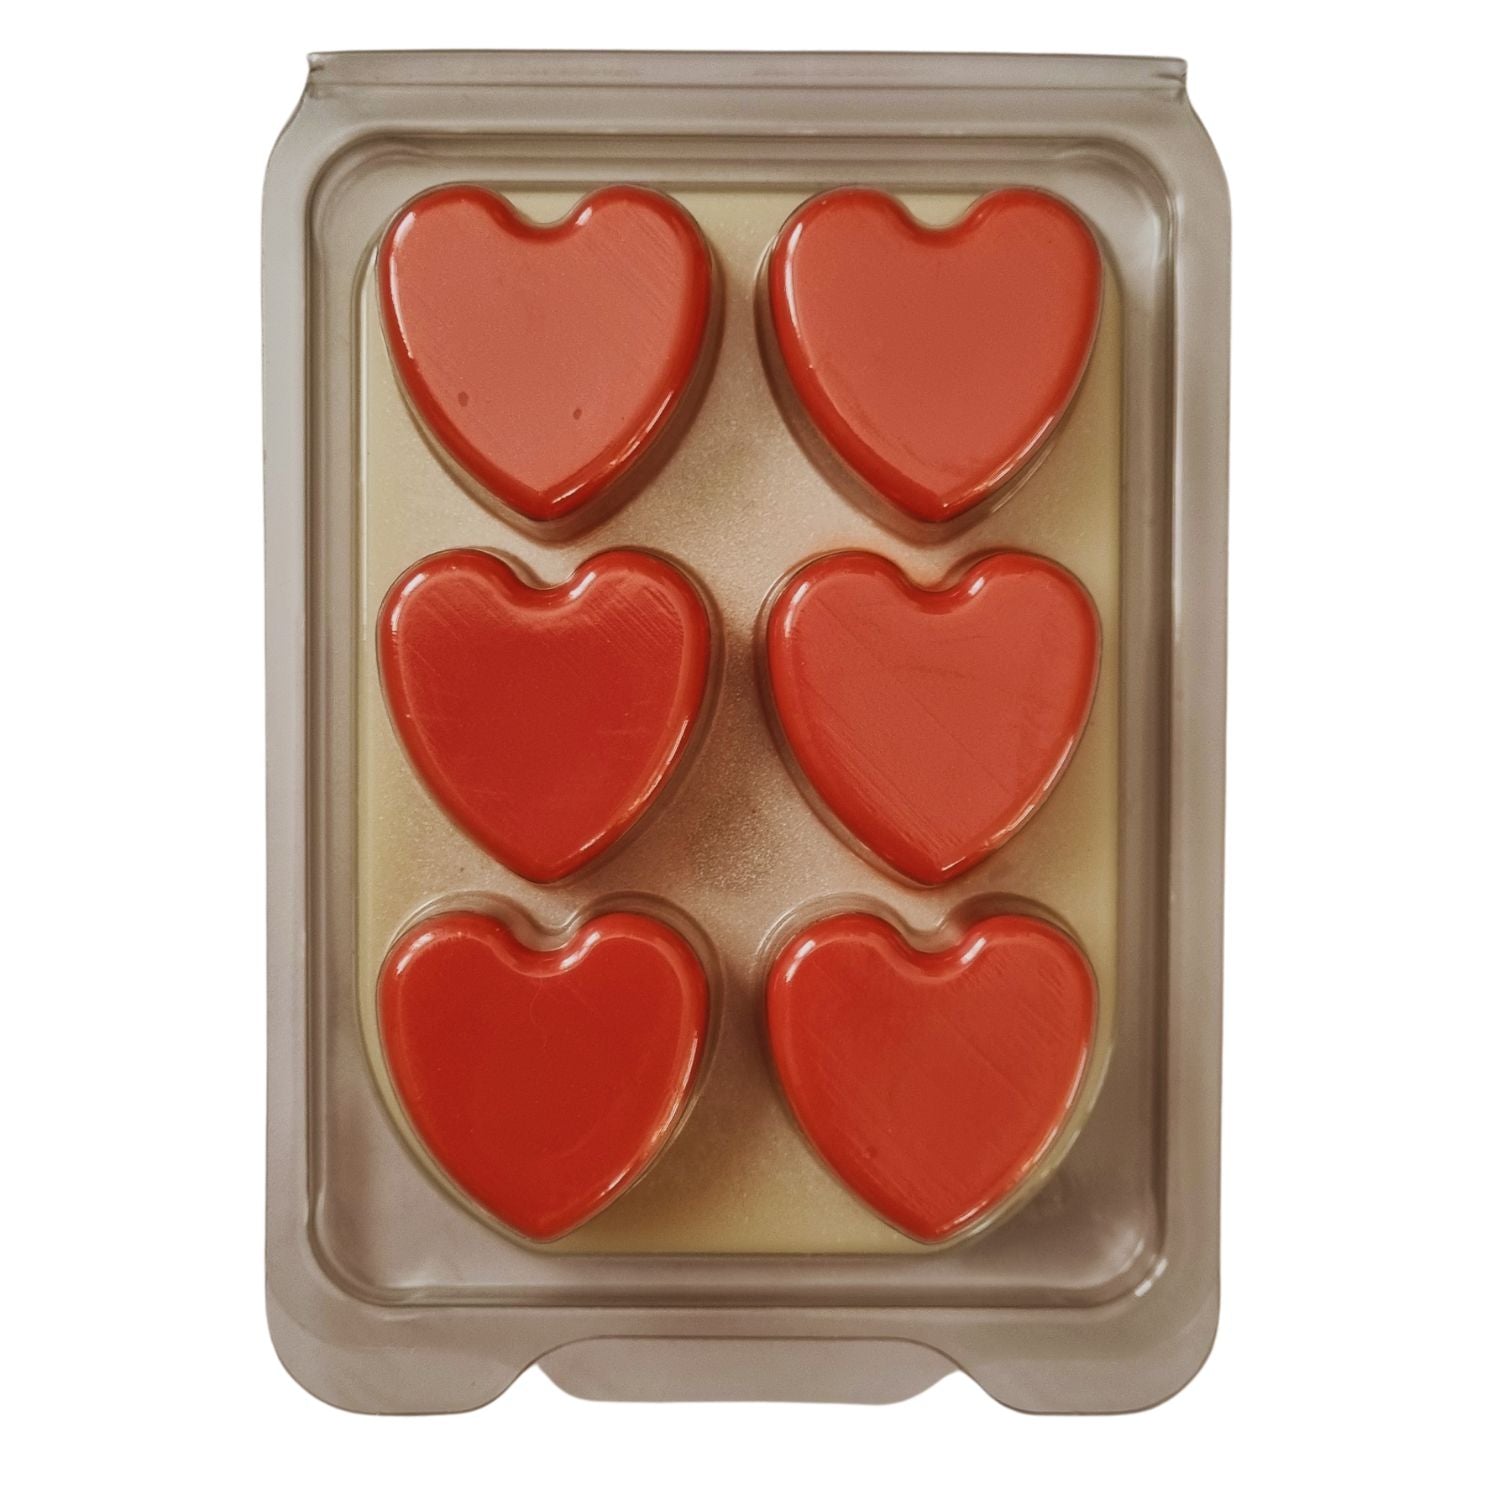 Scented Soy Wax Melts in hearts Clamshell with 6 red Hearts on white wax melt background